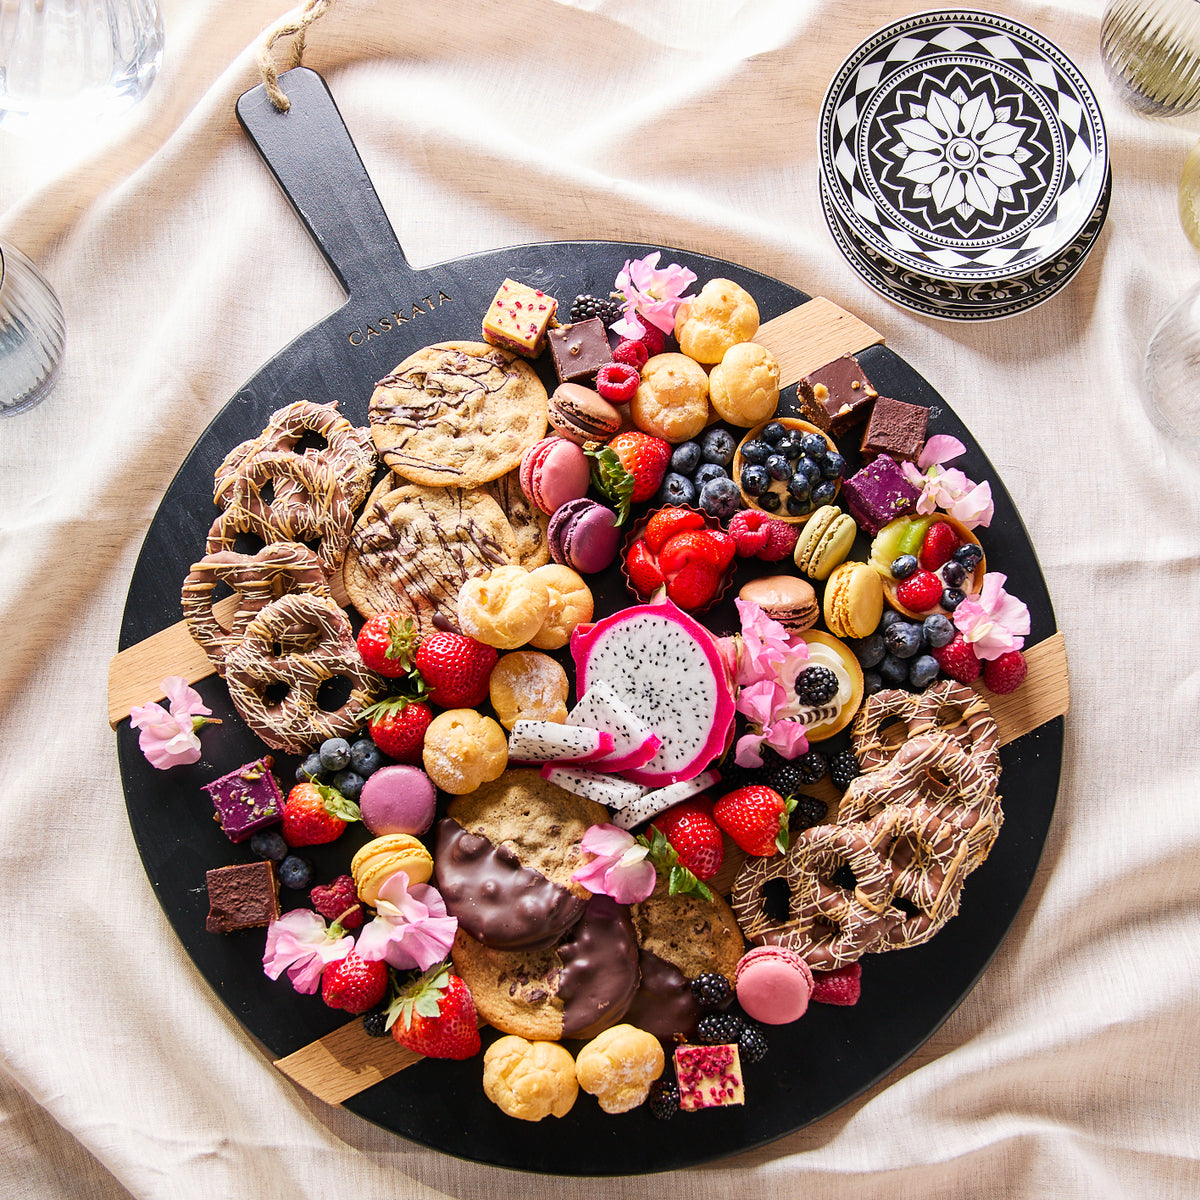 A vibrant charcuterie board with a variety of fruits, chocolates, and pastries on a Black &amp; Natural Round Charcuterie Big Board made from reclaimed European timbers by Etu Home, garnished with edible flowers.